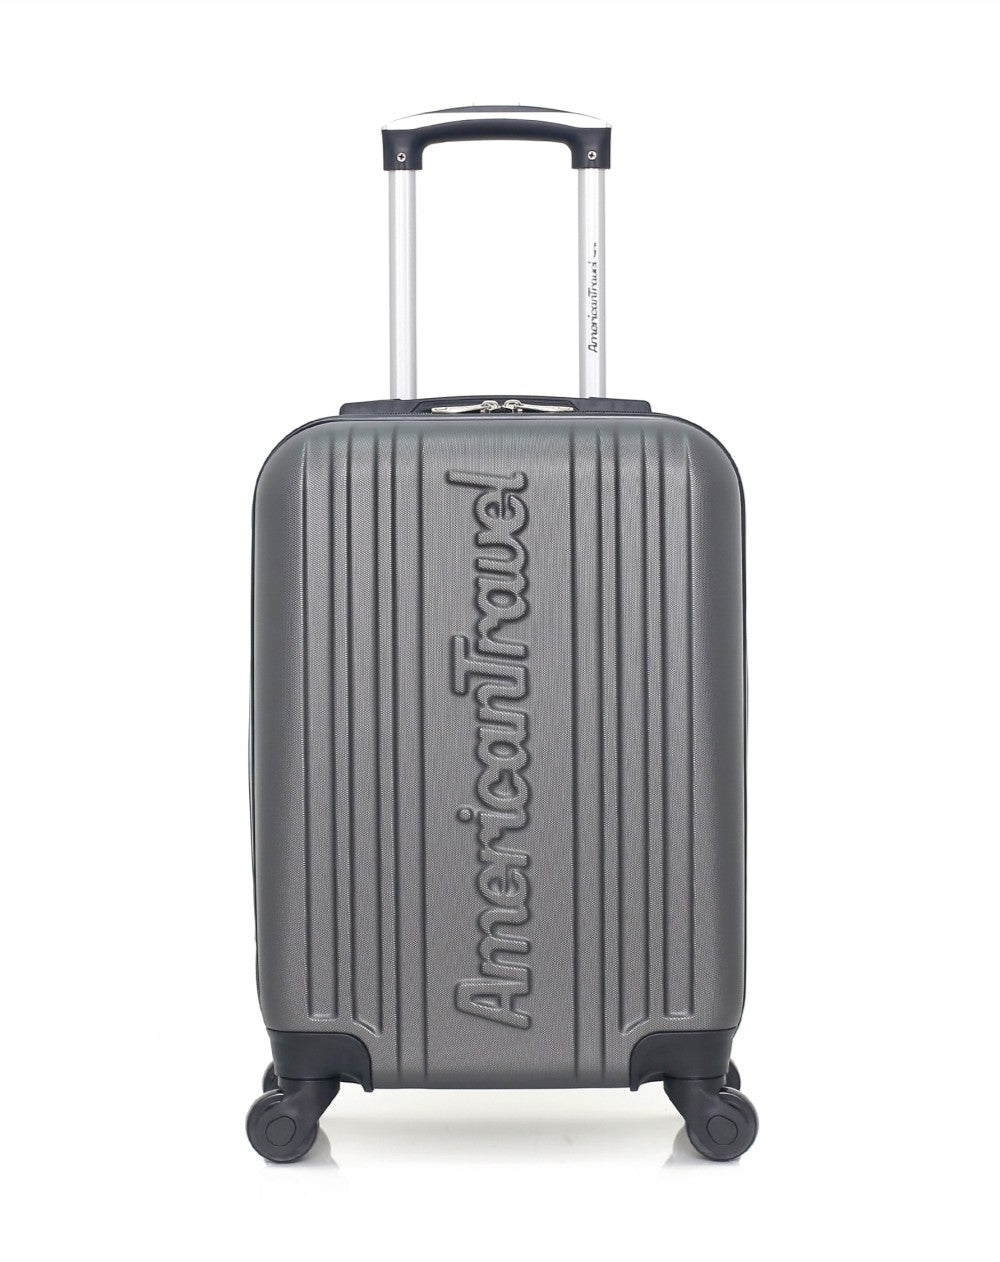 Valise Cabine ABS SPRINGFIELD-E 4 Roues 50 cm